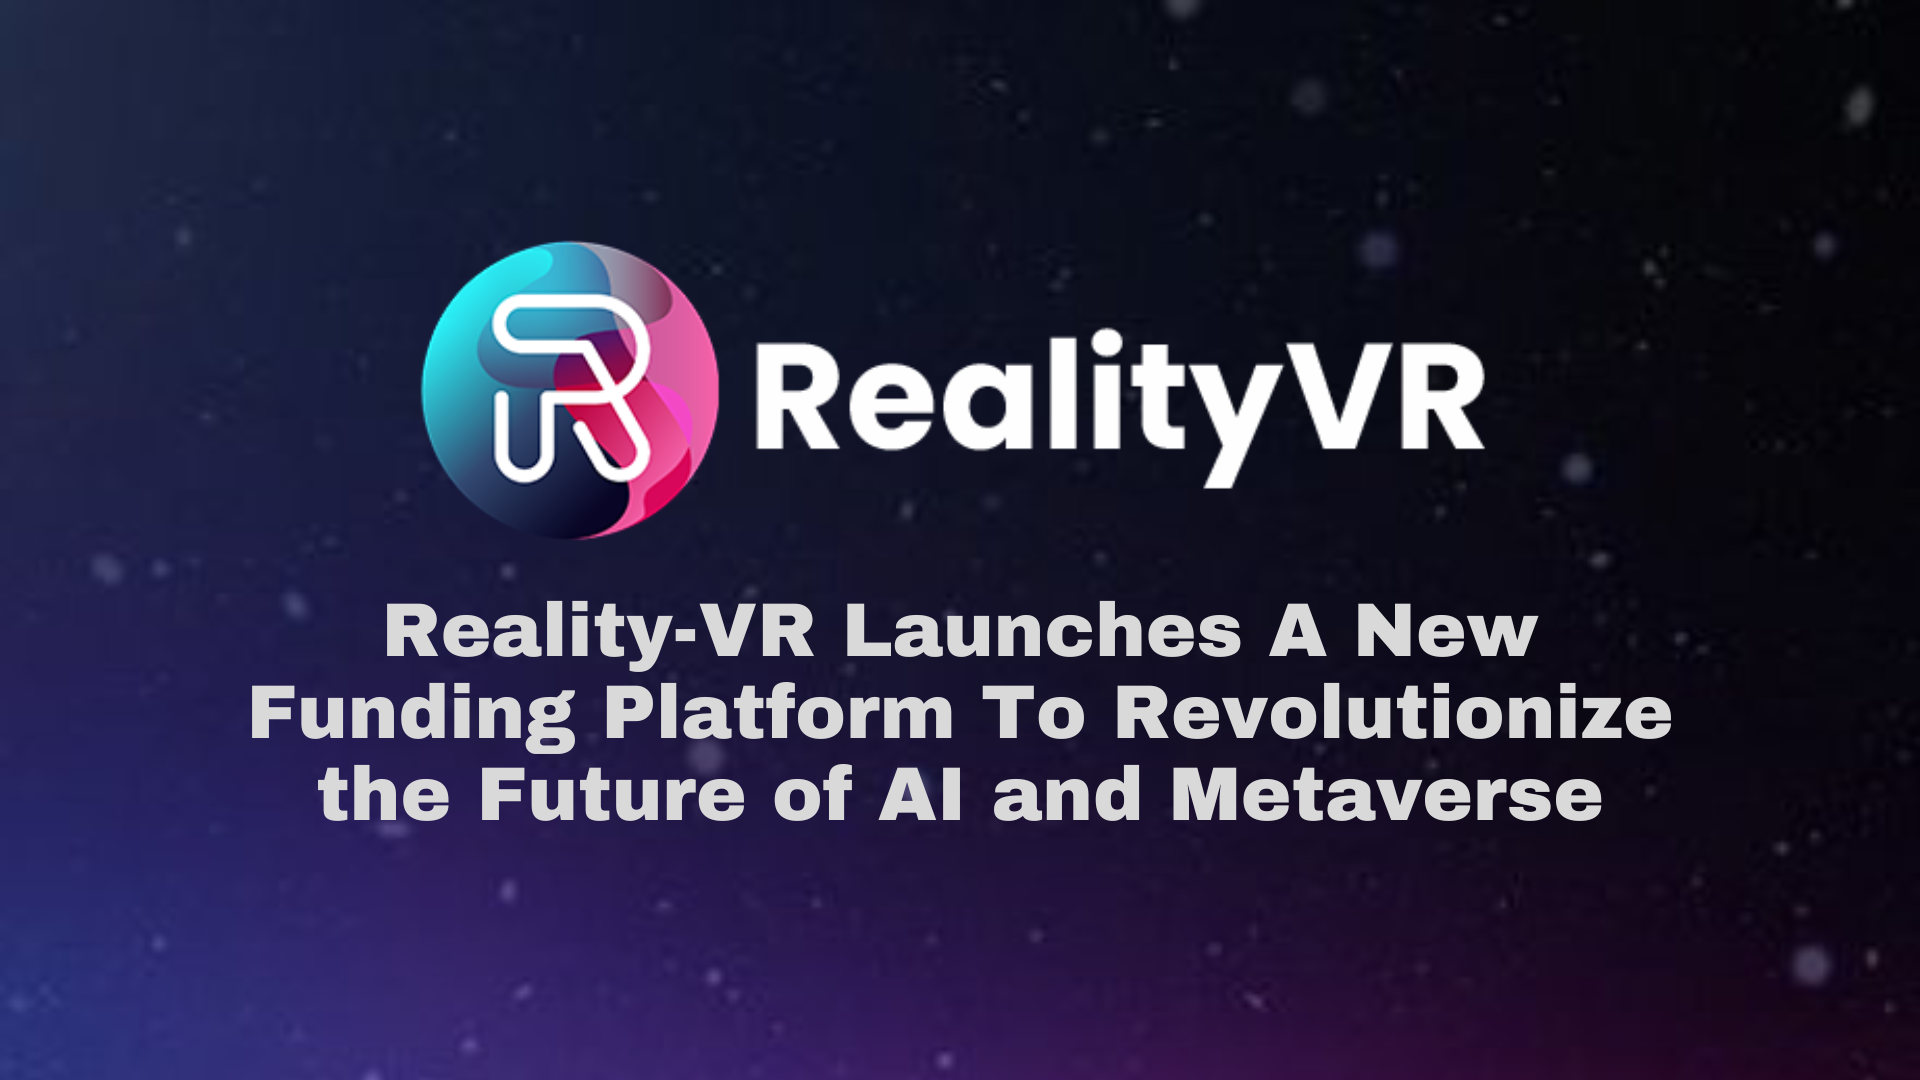 , Reality-VR Launches a New Funding Platform to Revolutionize the Future of AI and Metaverse